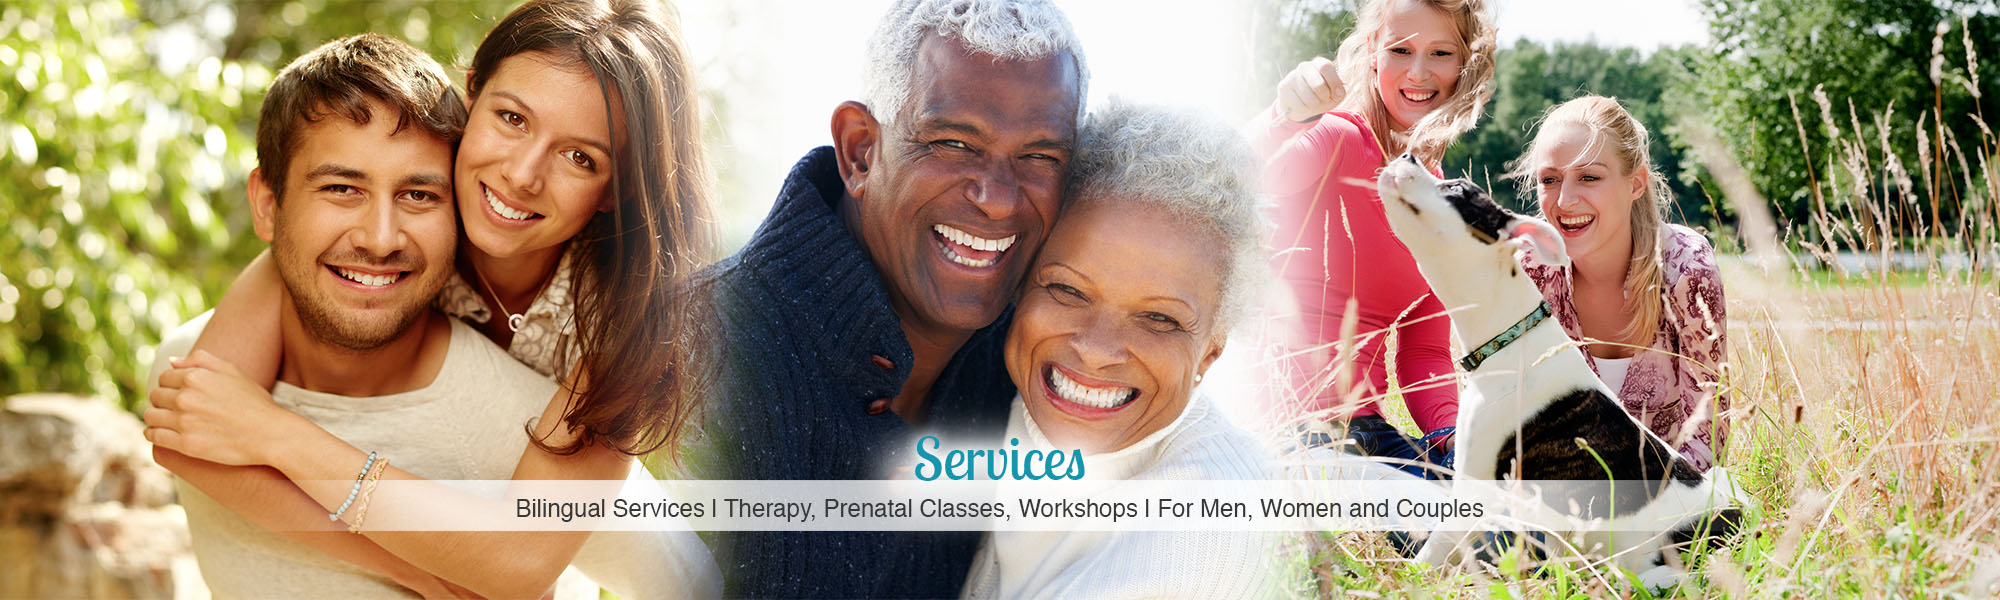 Services: Bilingual Services | Therapy, Prenatal Classes, Workshops | For Men, Women and Couples